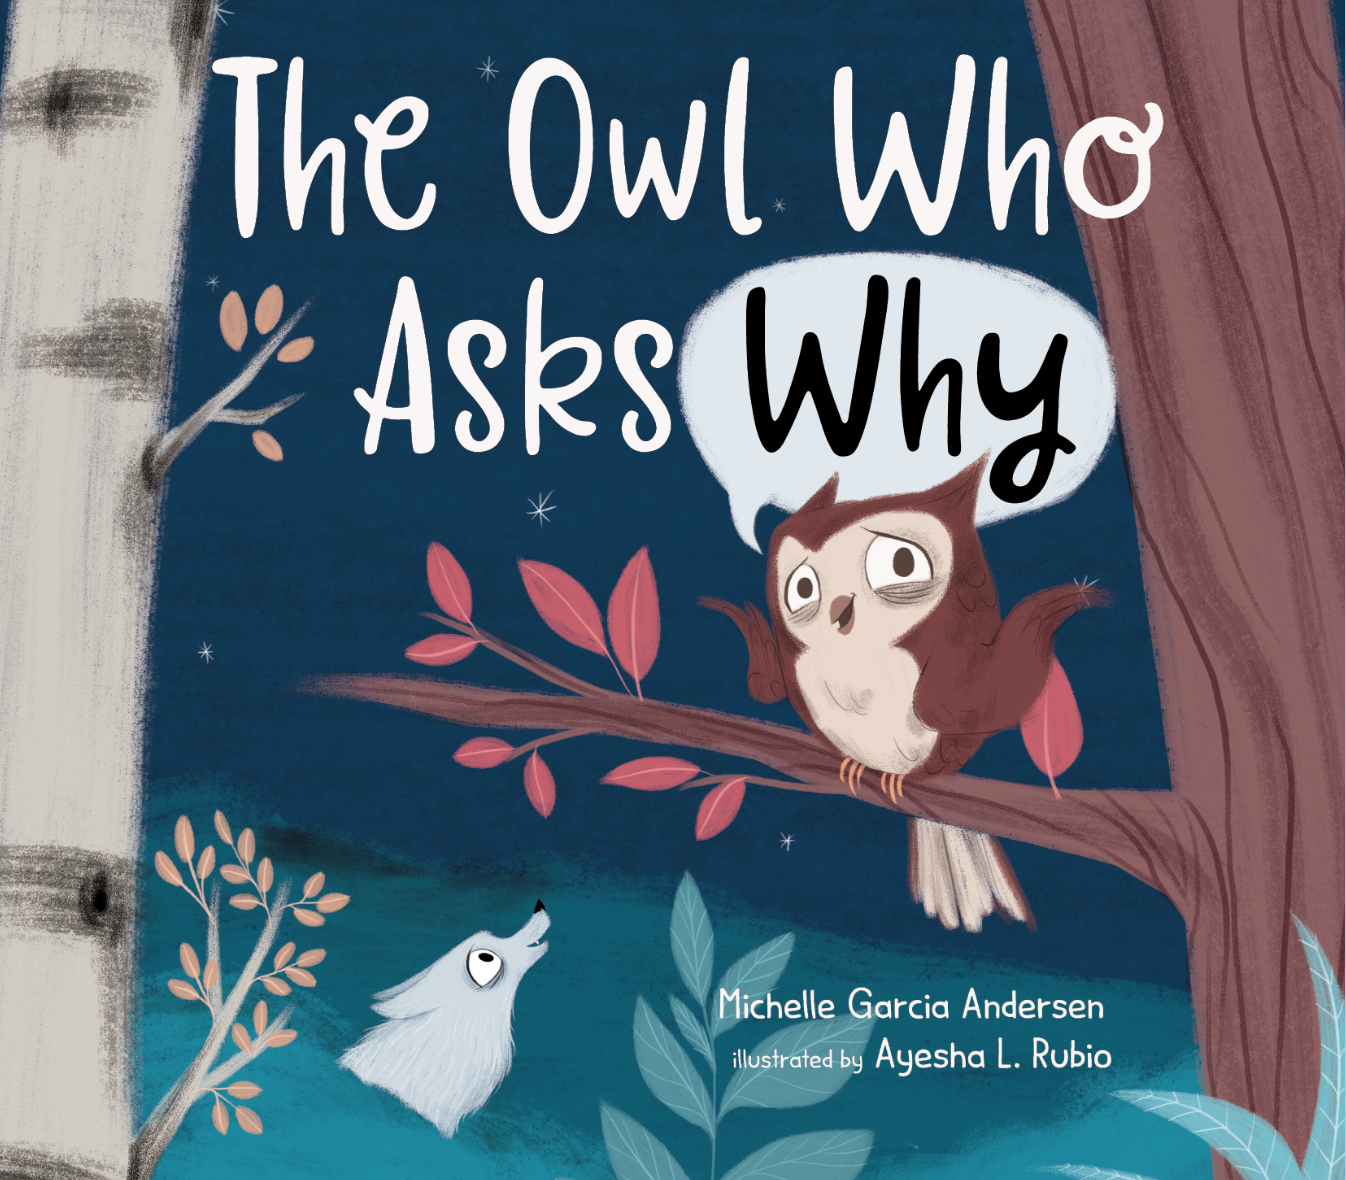 TheOwlWhoAsksWhy_Cover.png